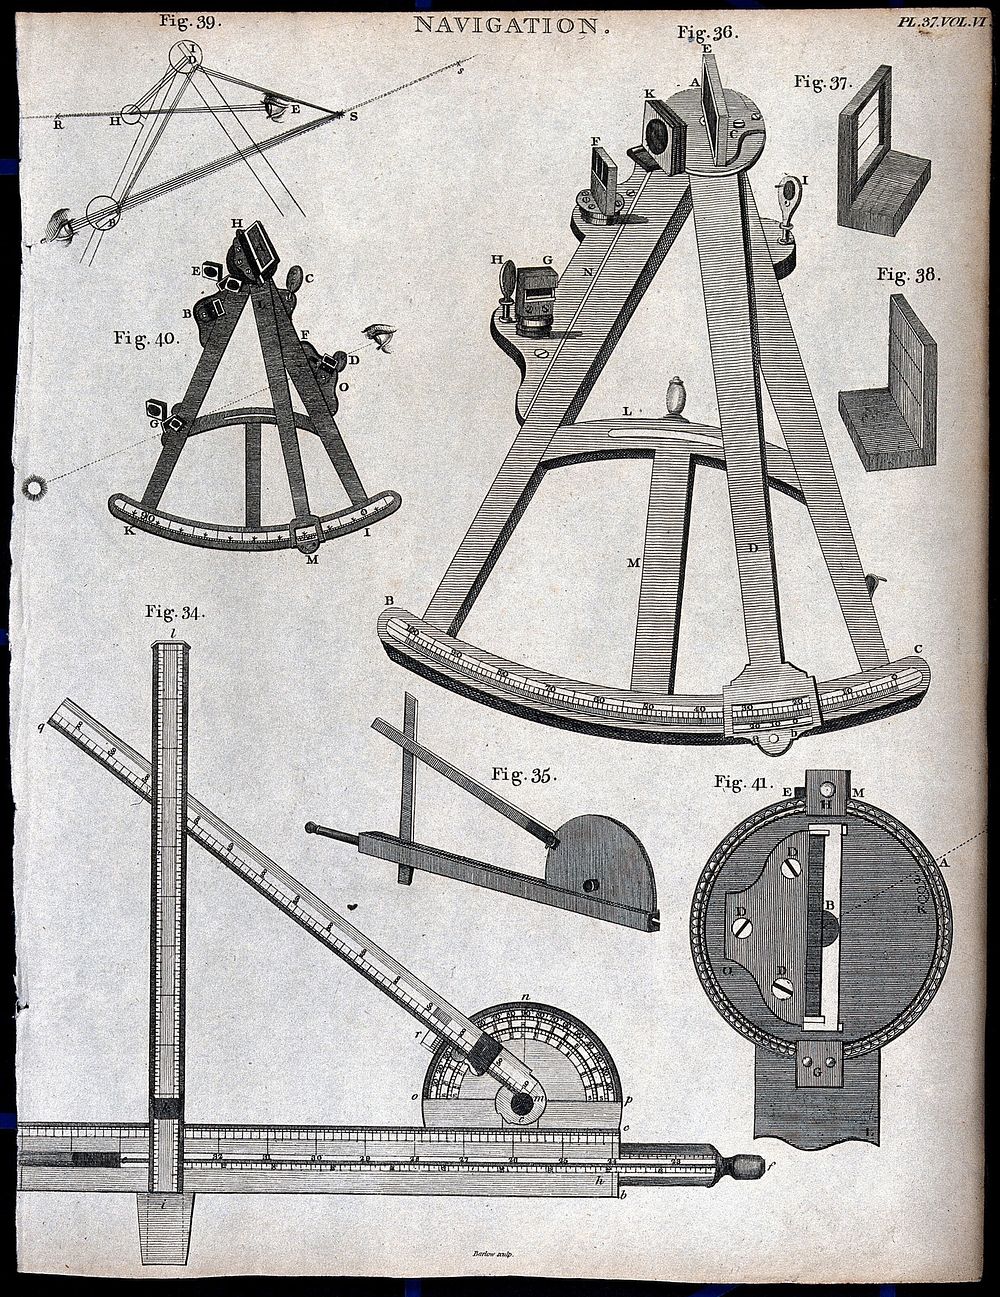 Navigation: various navigational aids, including a quadrant and a sextant. Engraving by Barlow.